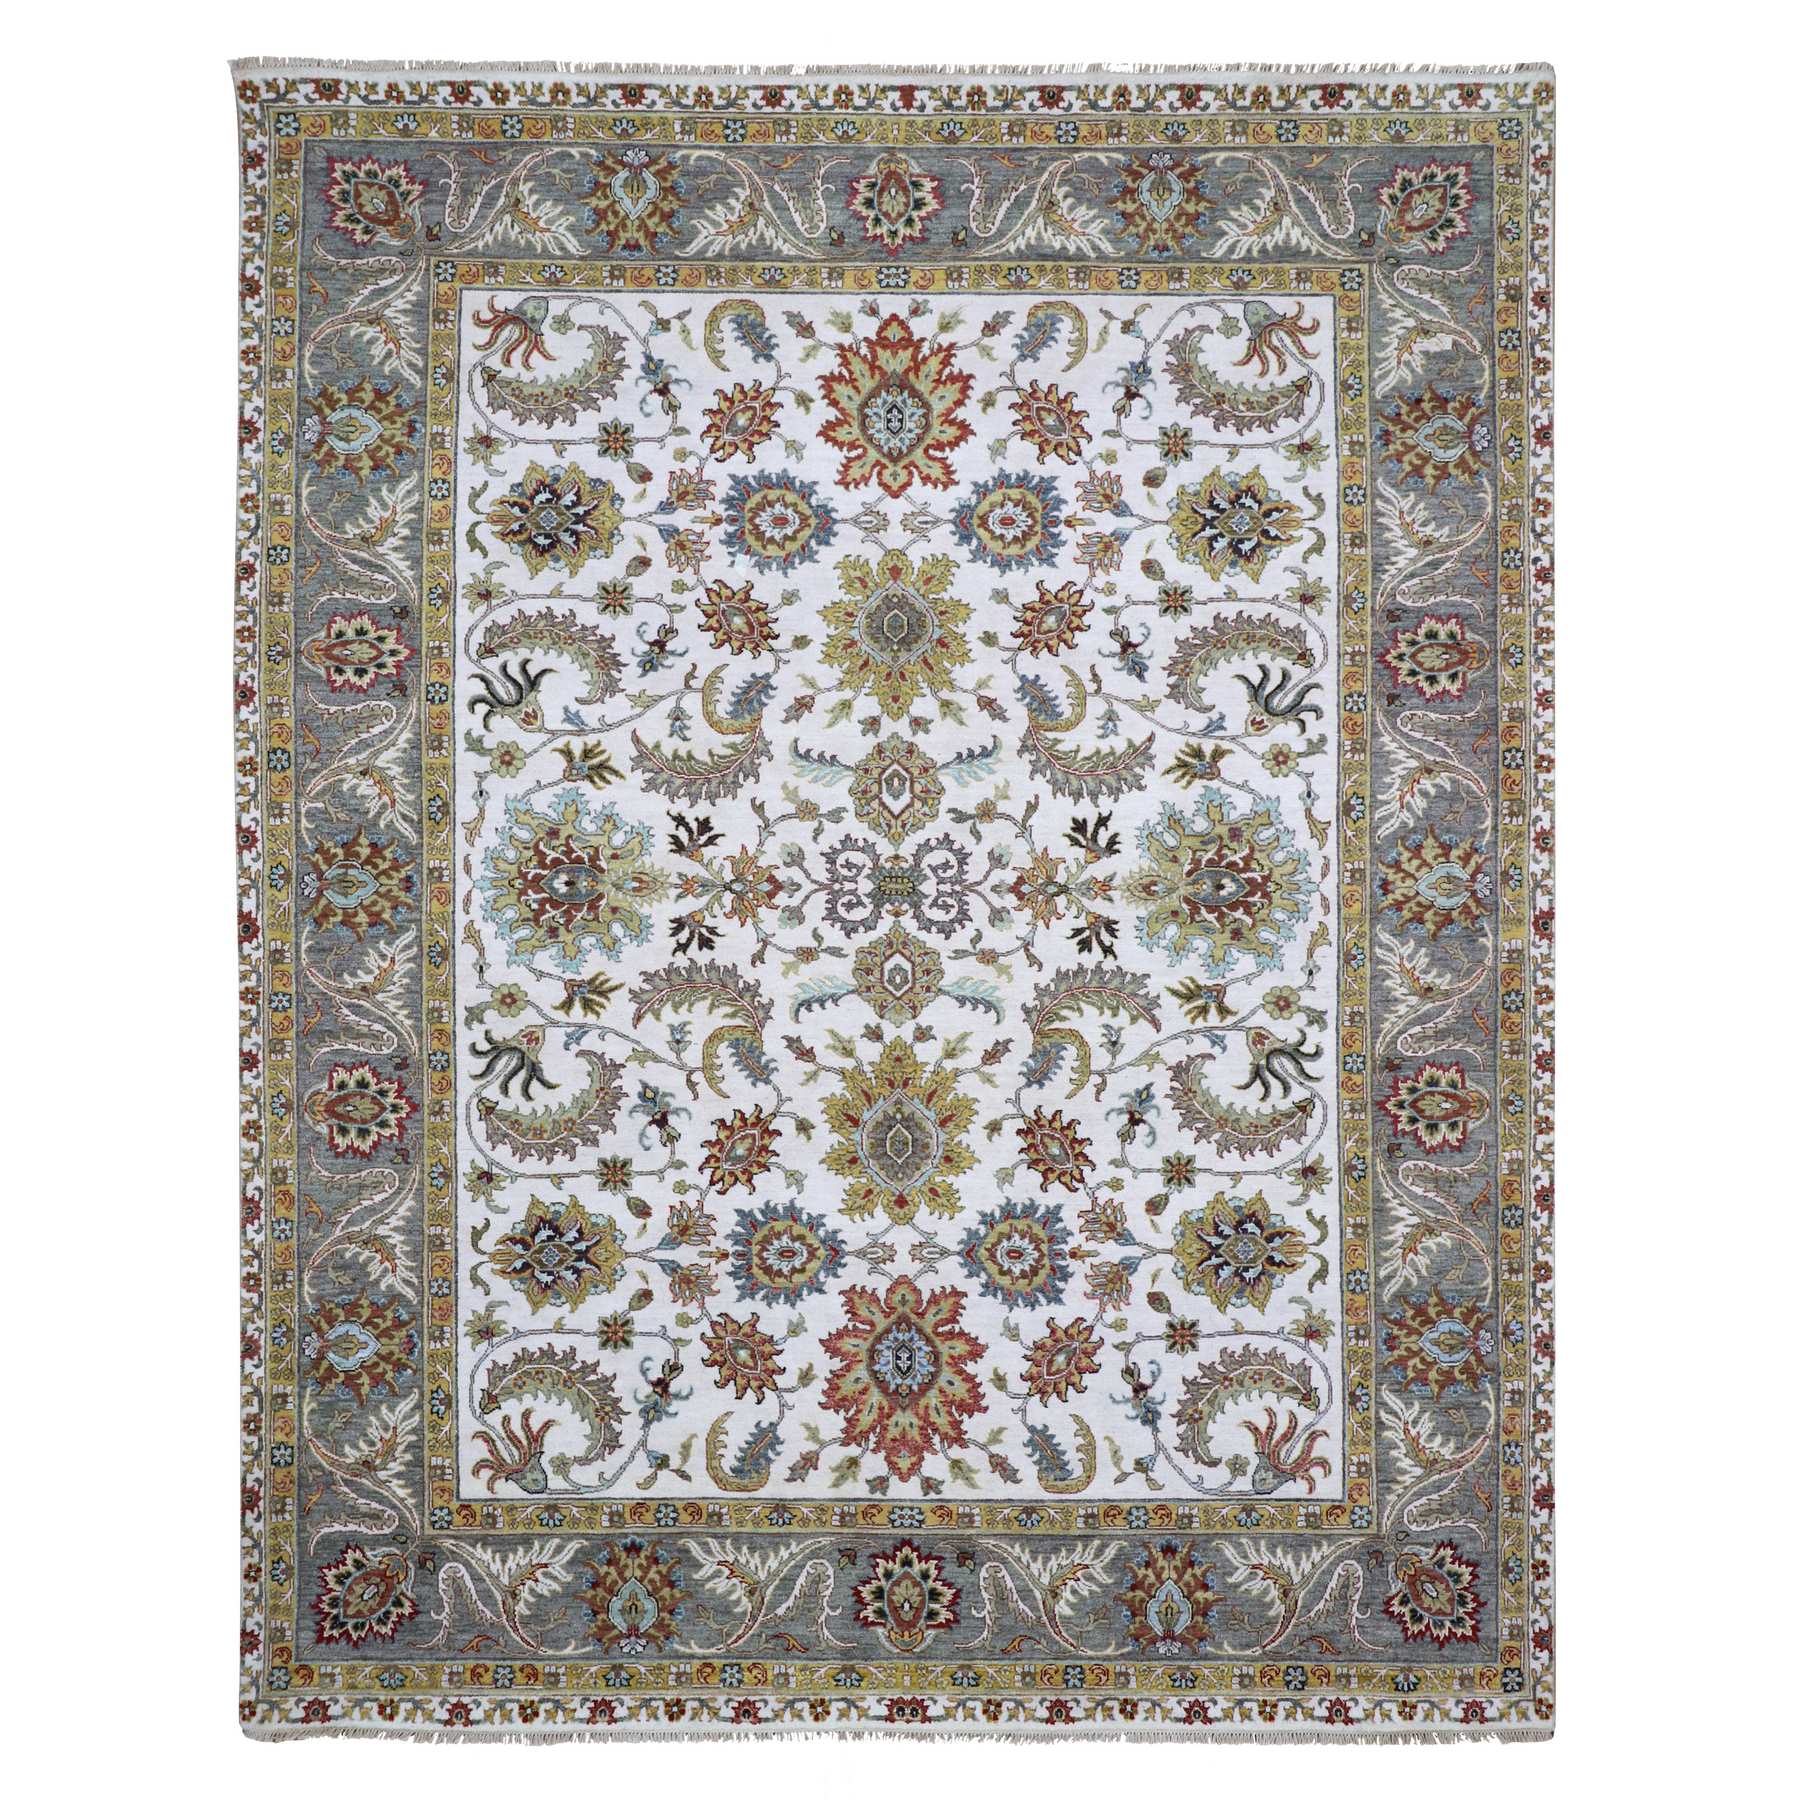 Vista White With Tapestry Brown, Agra 100% Wool Hand Knotted Scroll and Large Leaf Design, Natural Dyes, Oriental Rug